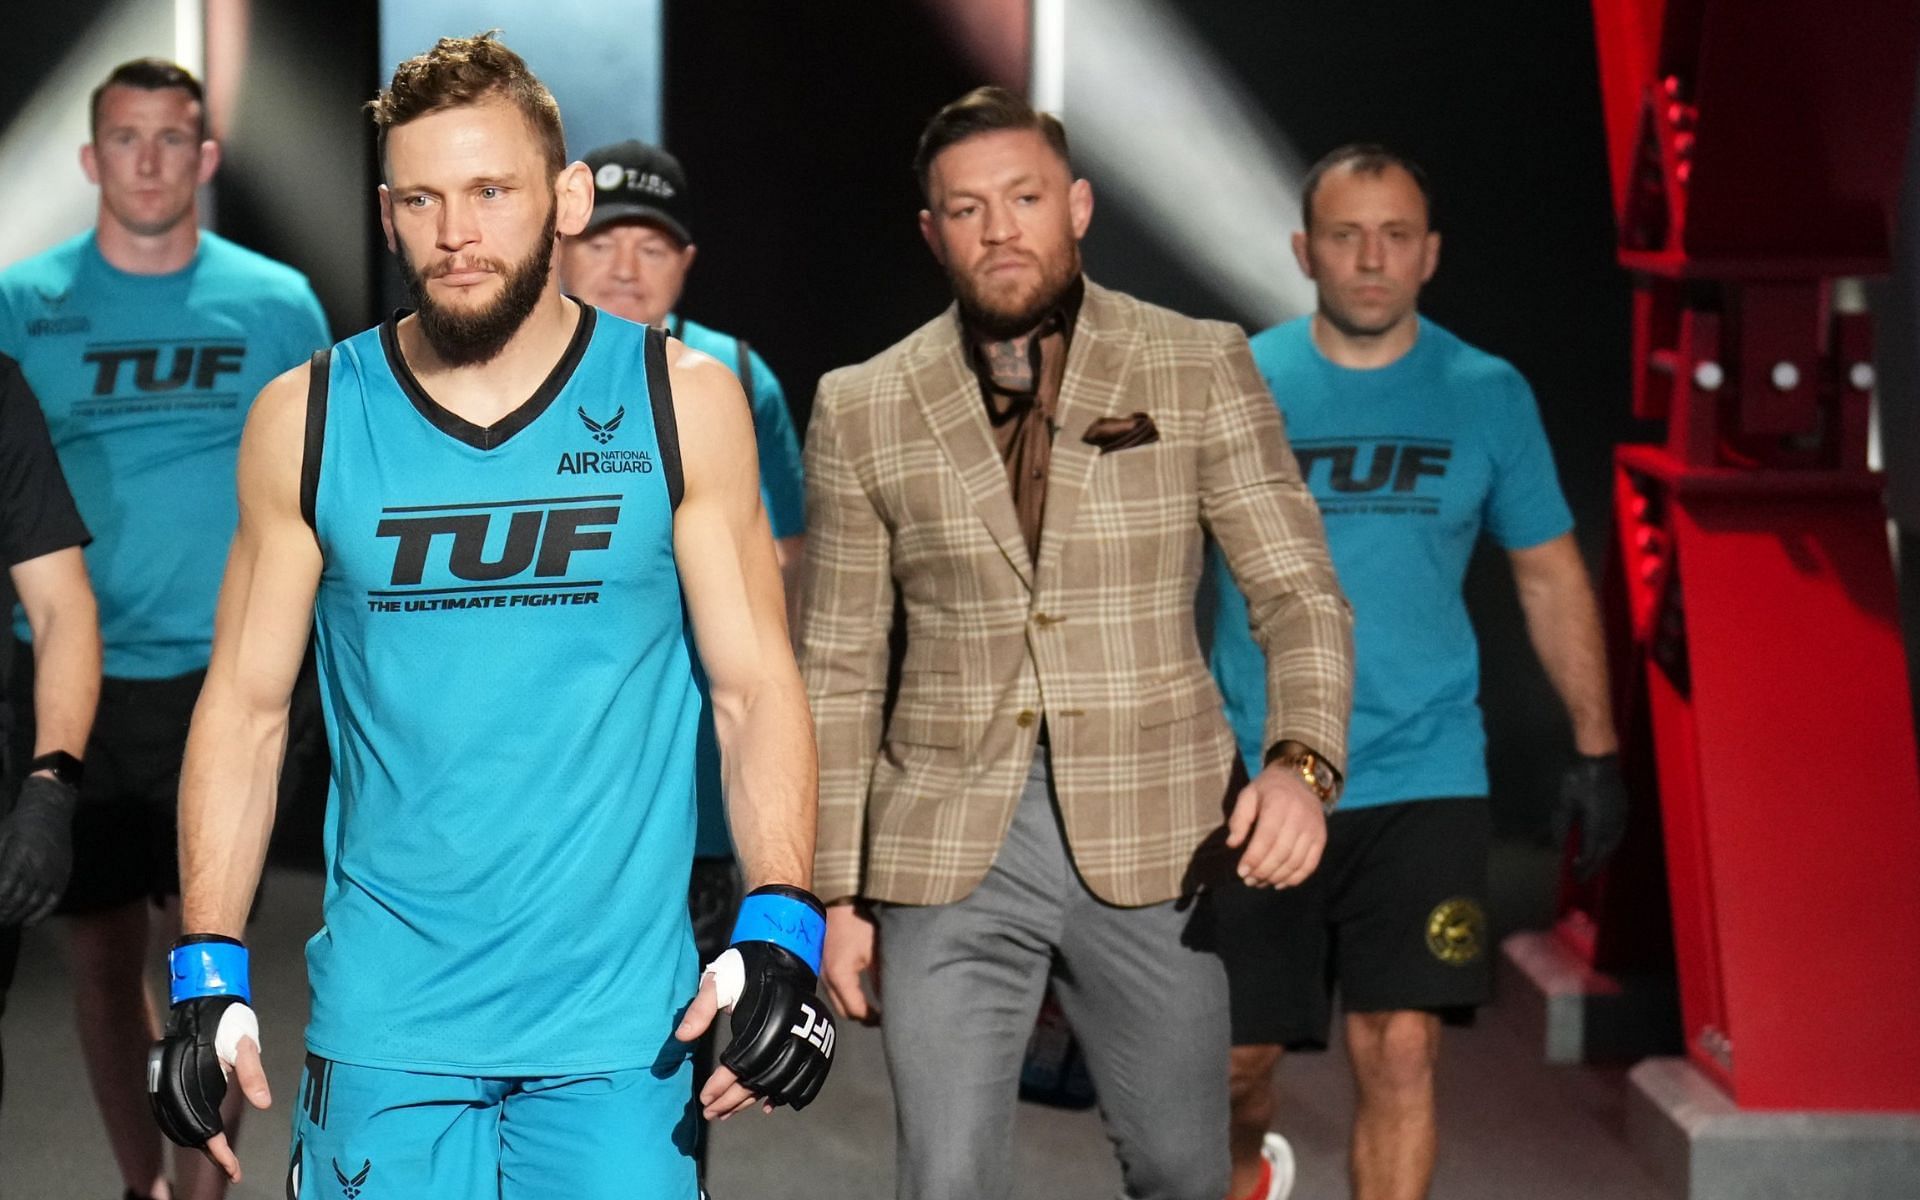 Conor McGregor on The Ultimate Fighter 31 [Photo credit: @UltimateFighter - Twitter]